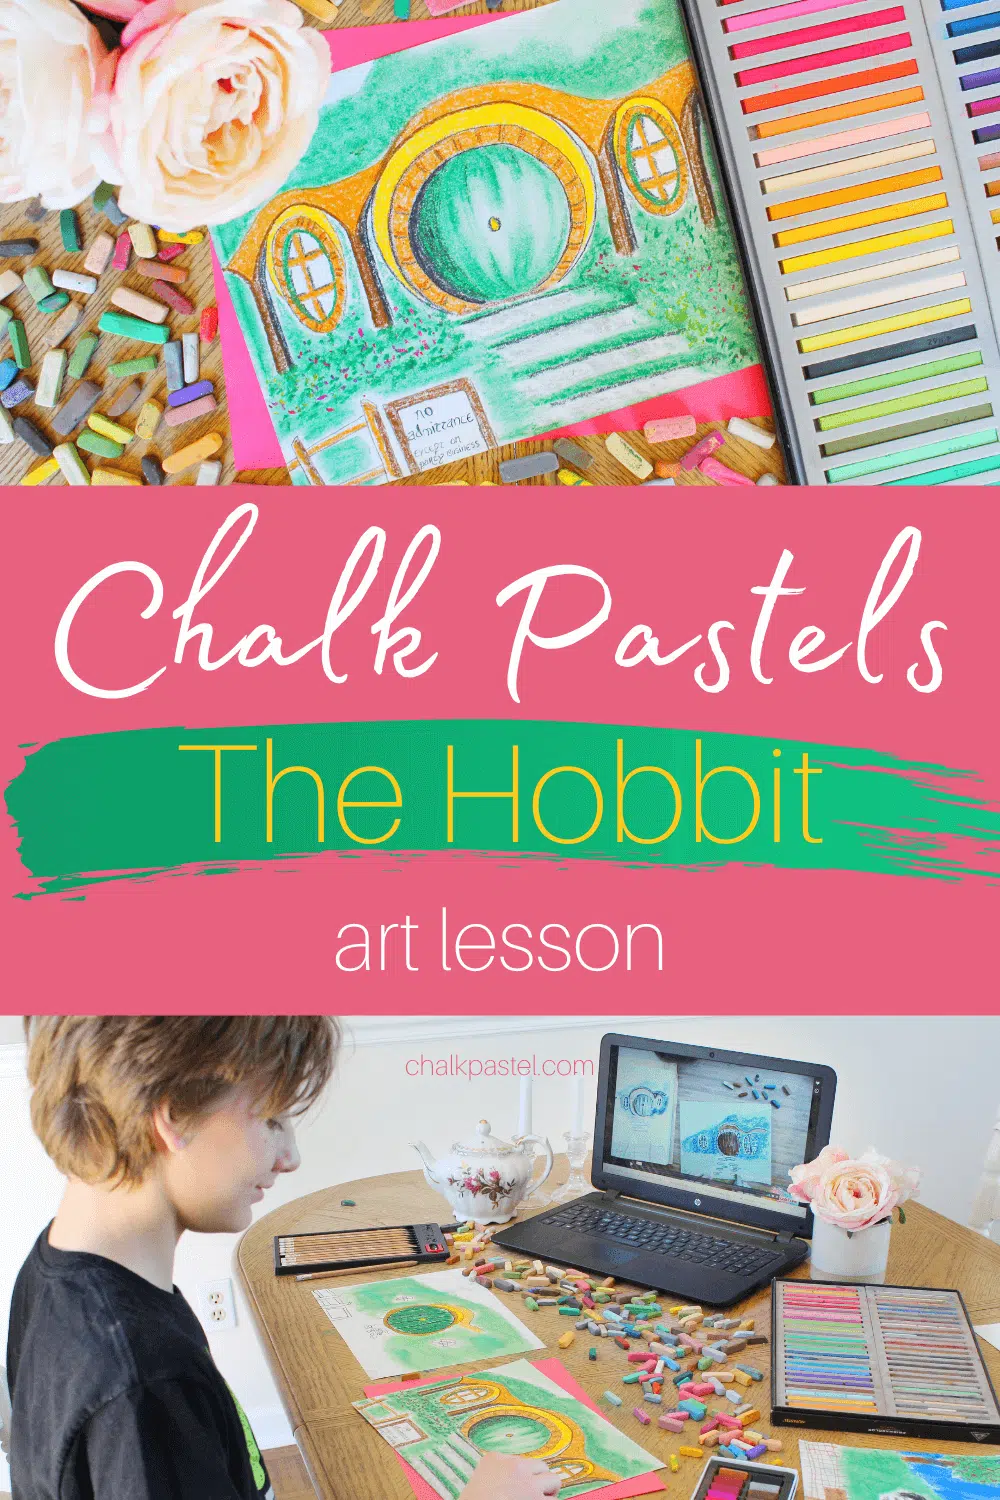 Chalk Pastels The Hobbit Art Lesson: Do your kiddos love the fantasy and adventure of  J. R. R. Tolkien's The Hobbit? Then, The Hobbit art lesson with Nana and chalk pastels are for you! #chalkpastel #YouAREAnArtist #TheHobbit #TheHobbitartlesson #TheHobbitchalkpastellesson #chalkpastellessons